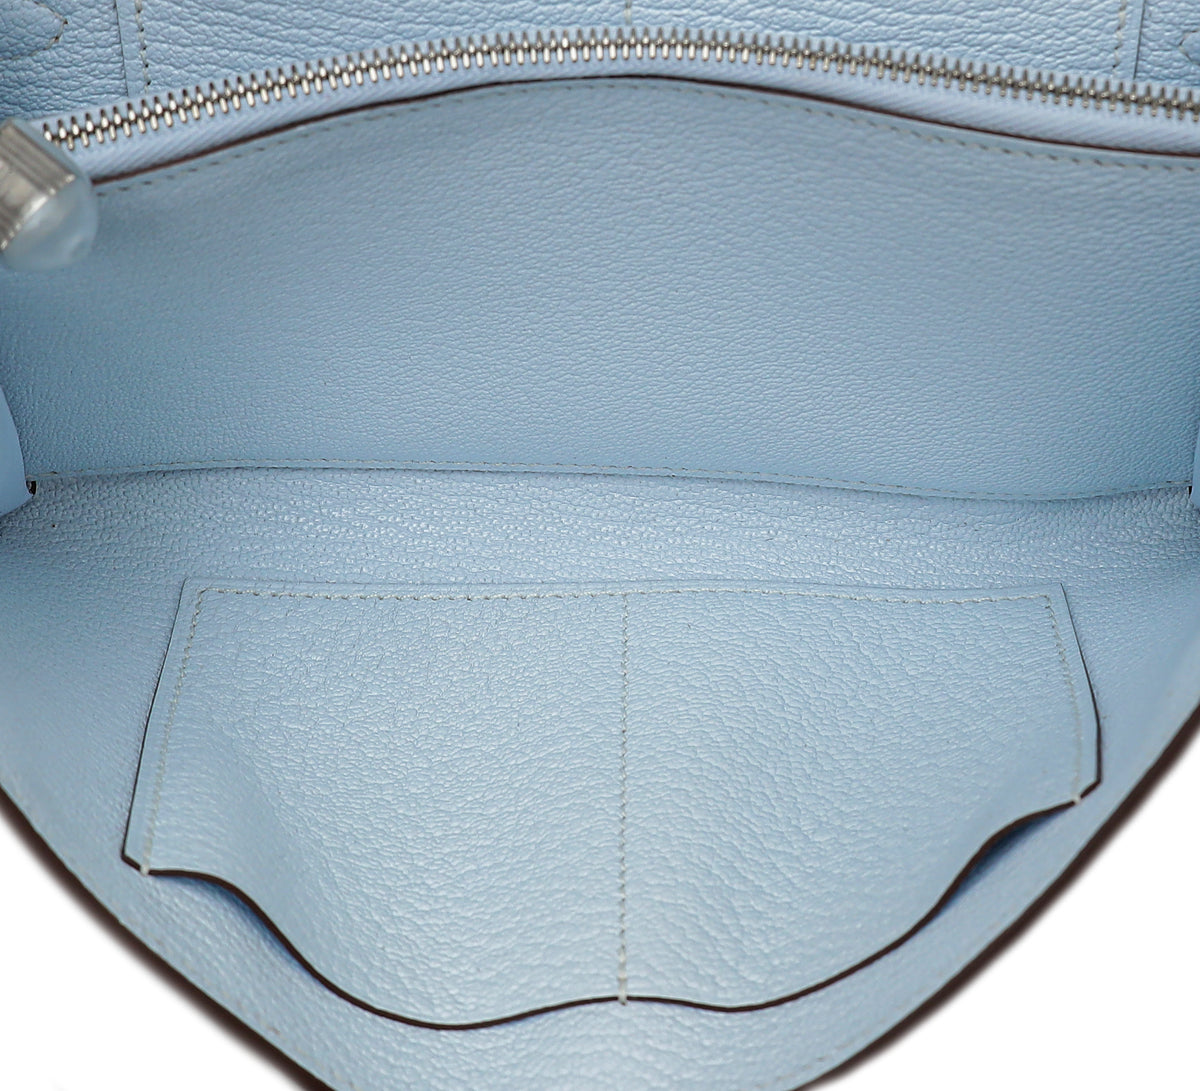 Hermes Blue Brume Kelly Classique To Go Wallet